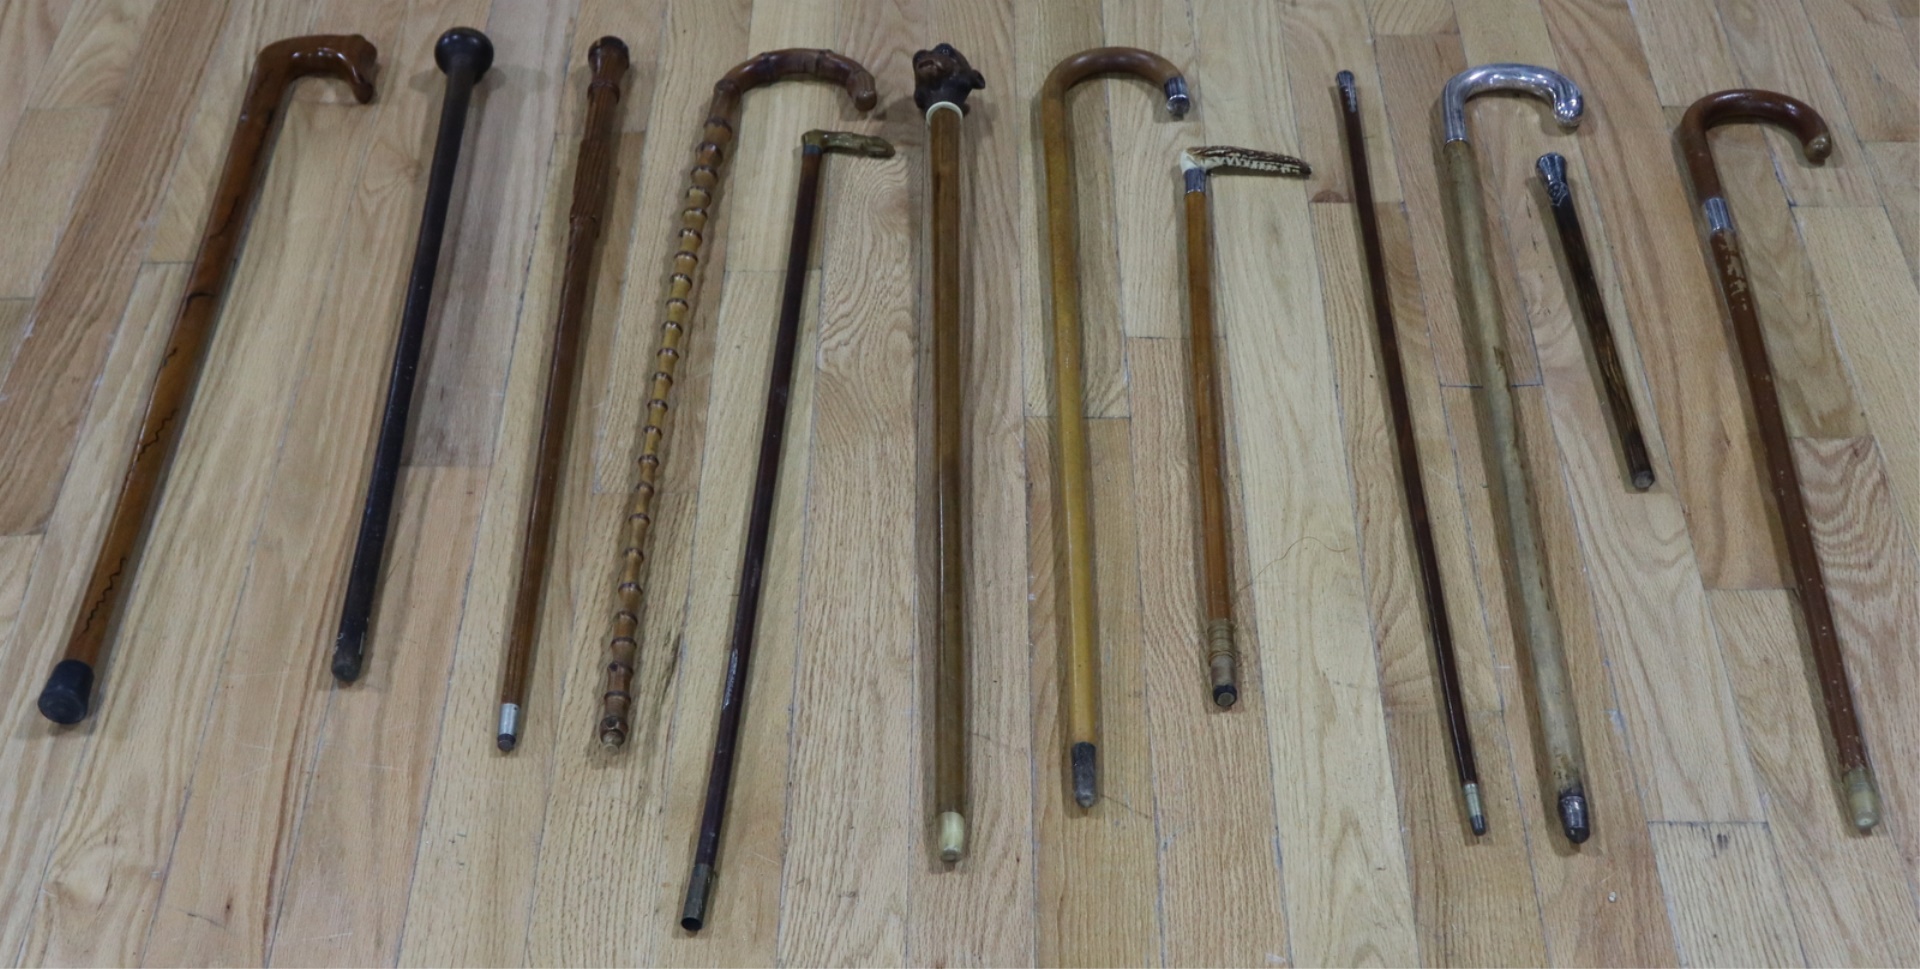 SILVER. LOT OF (12) VINTAGE CANES